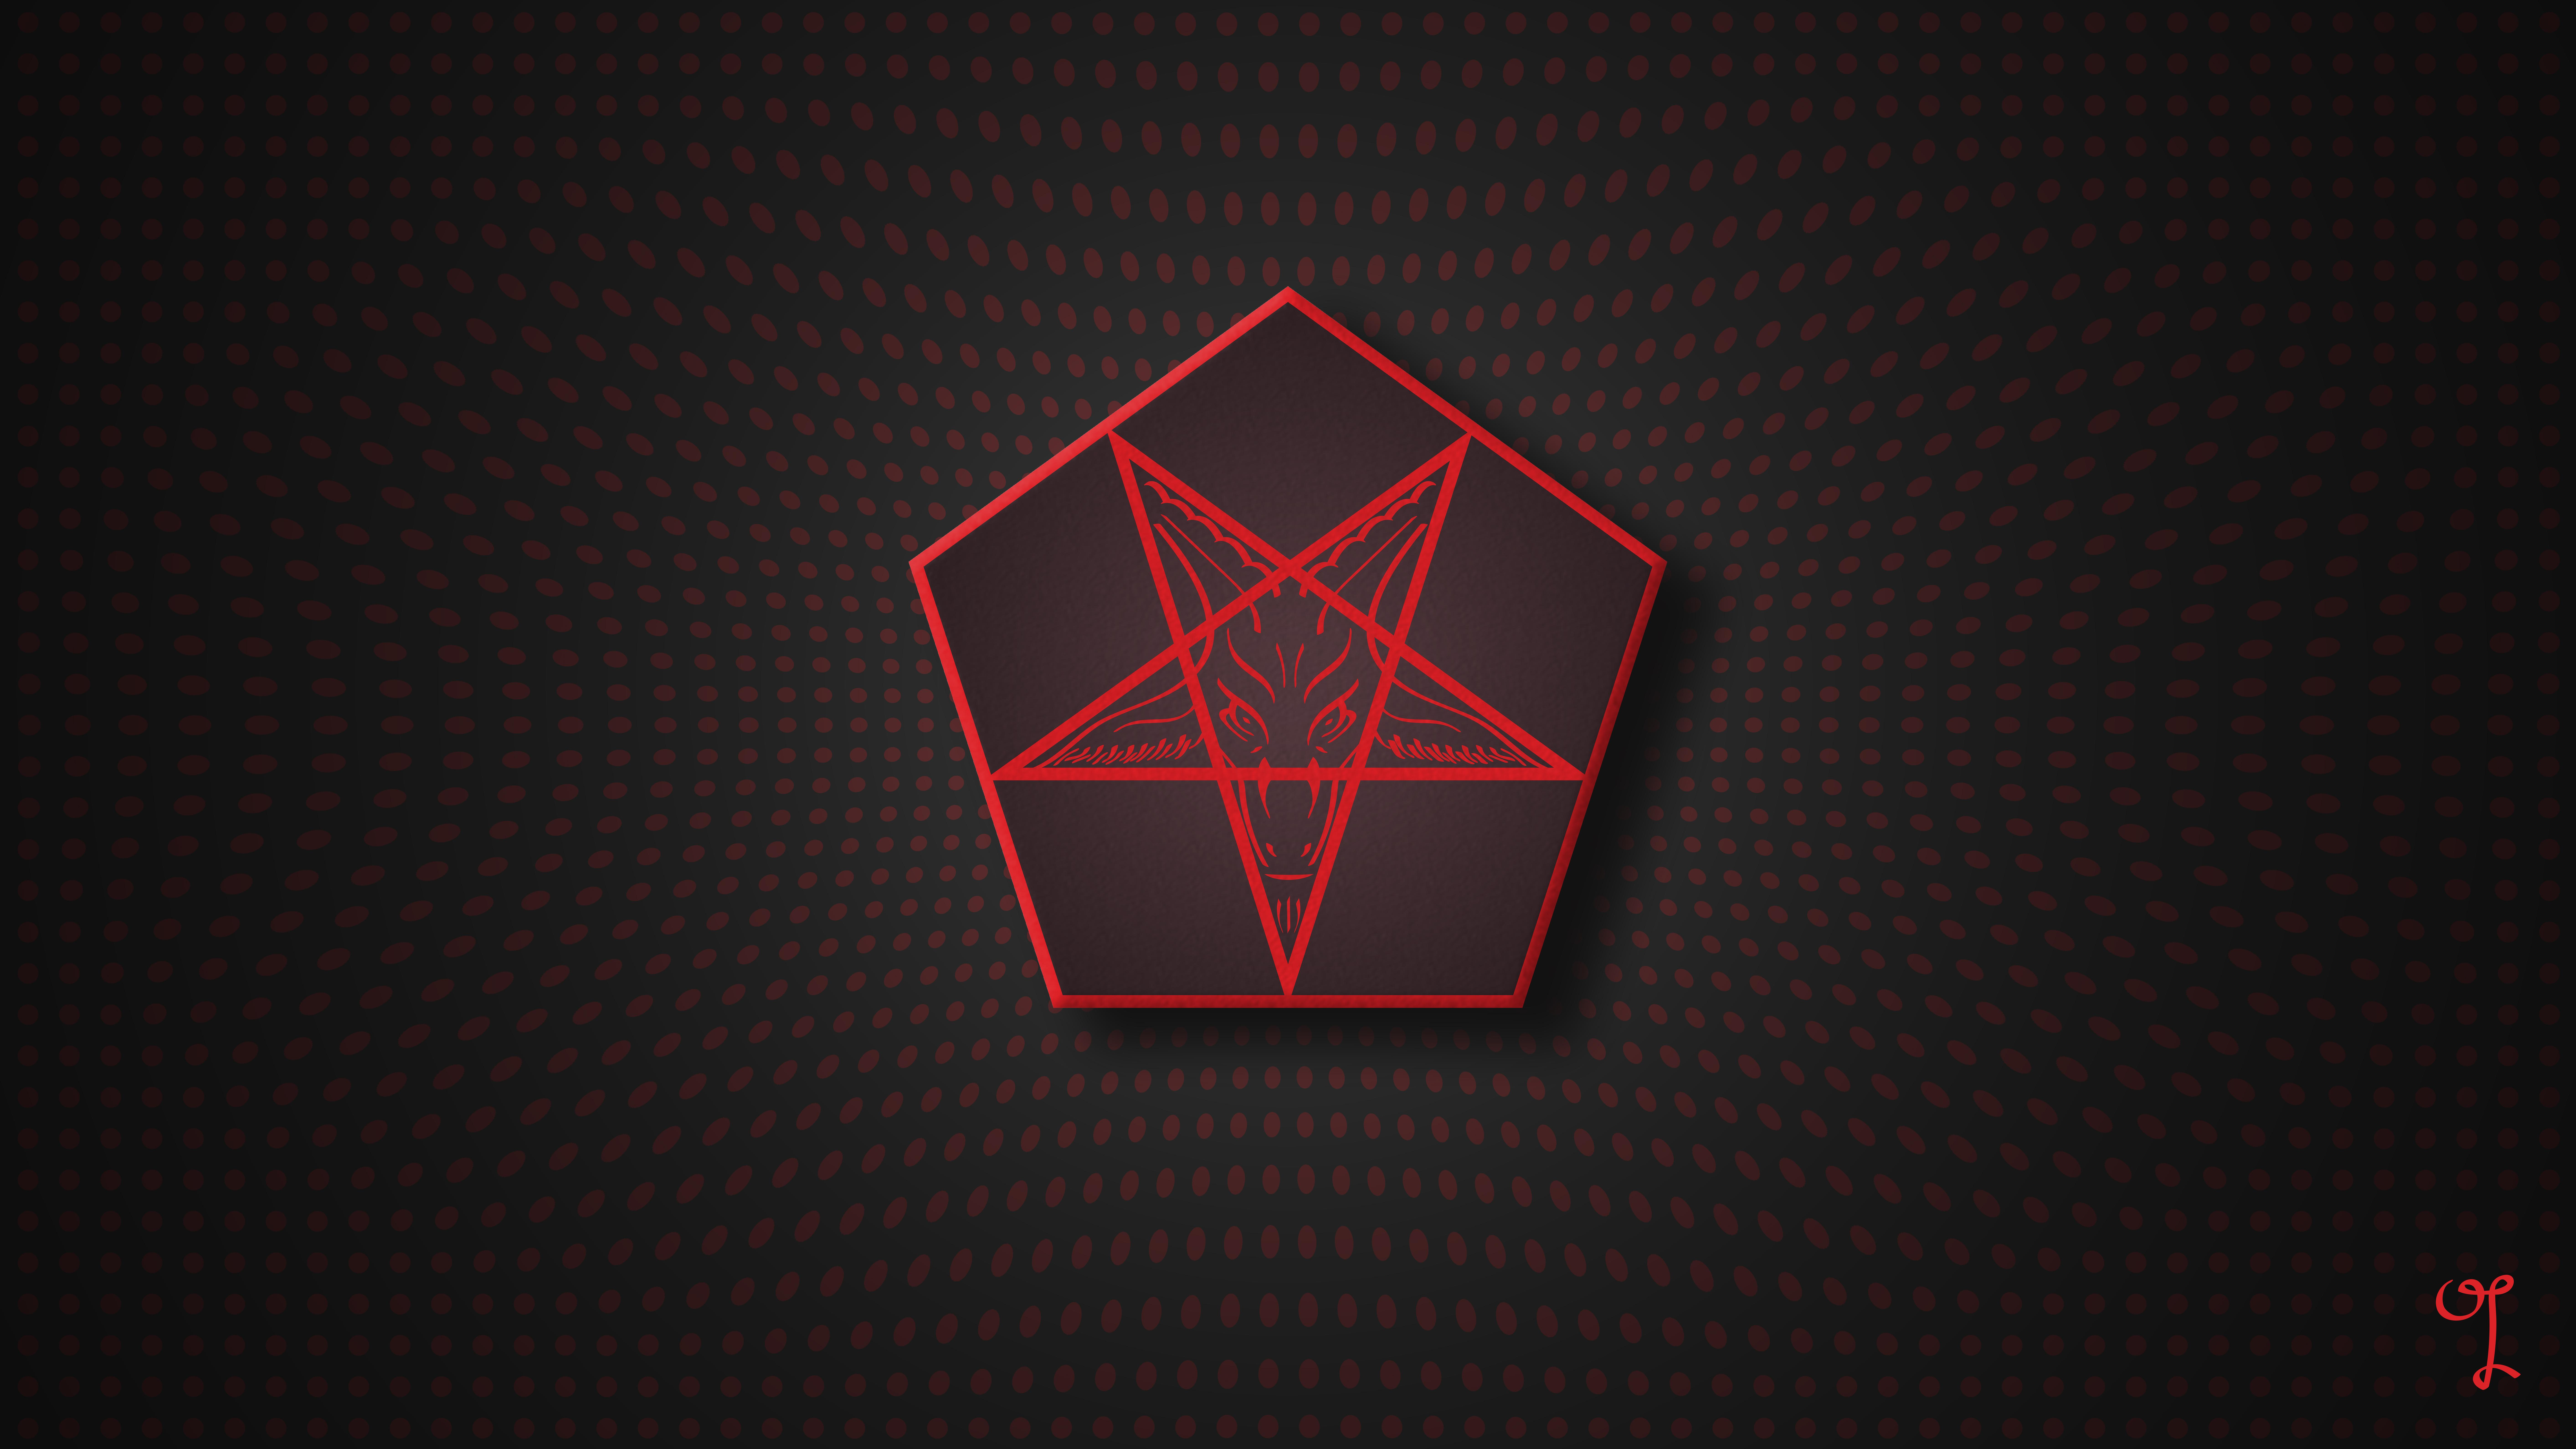 A New Sigil Of Baphomet Wallpaper I Made For My Favorite Sub